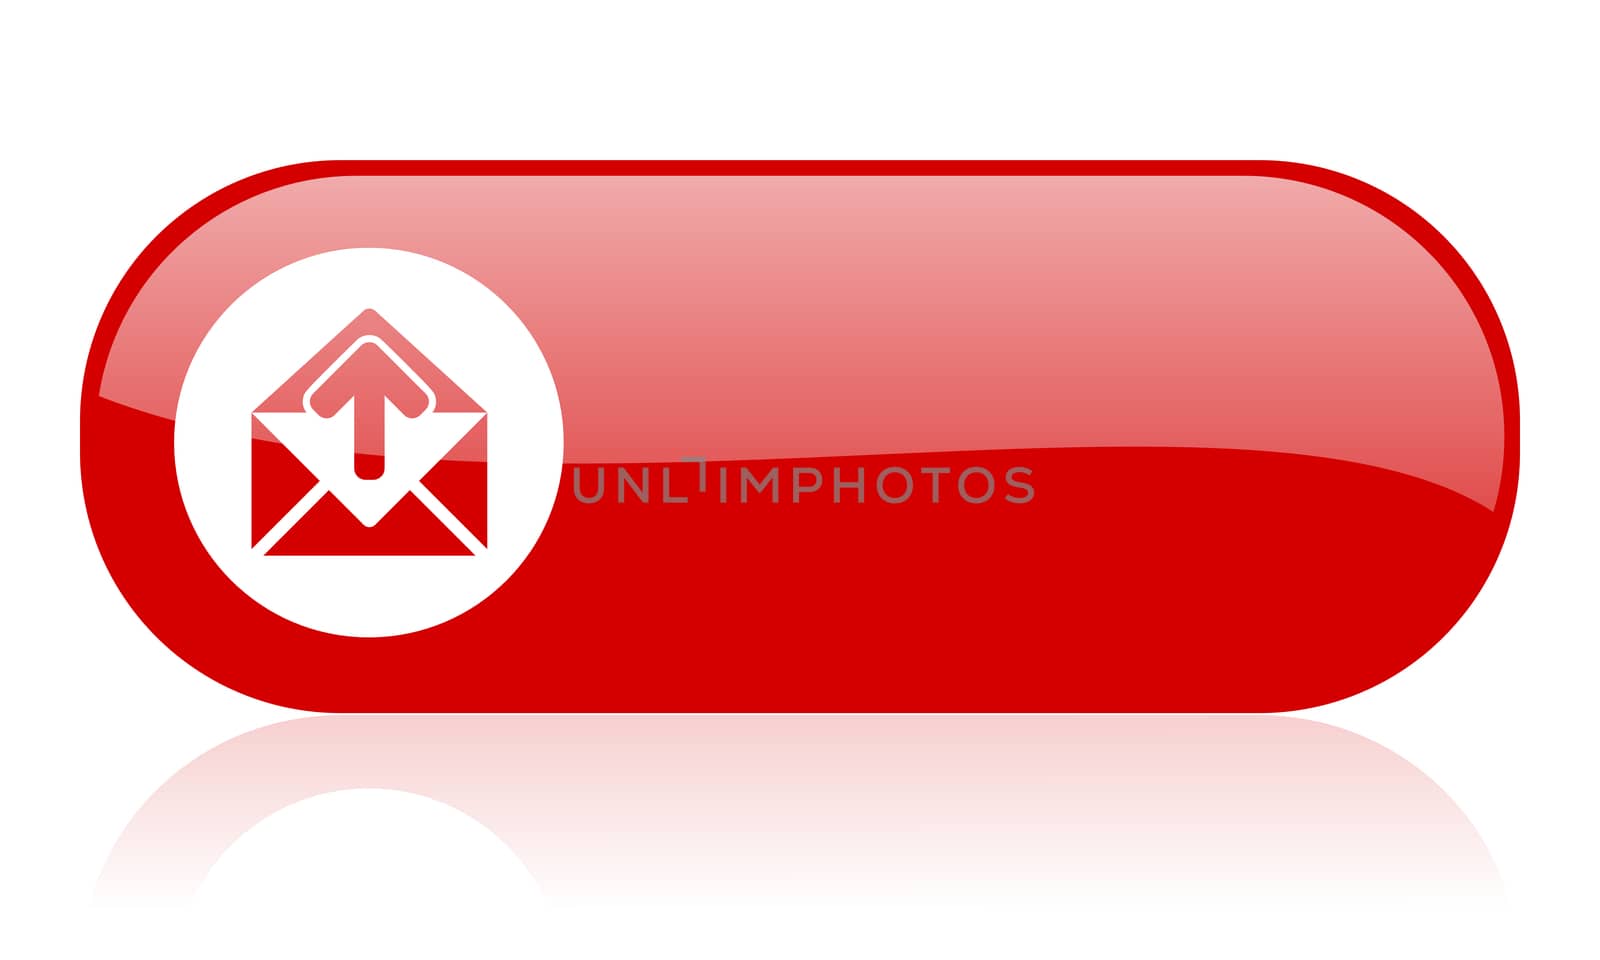 mail red web glossy icon by alexwhite